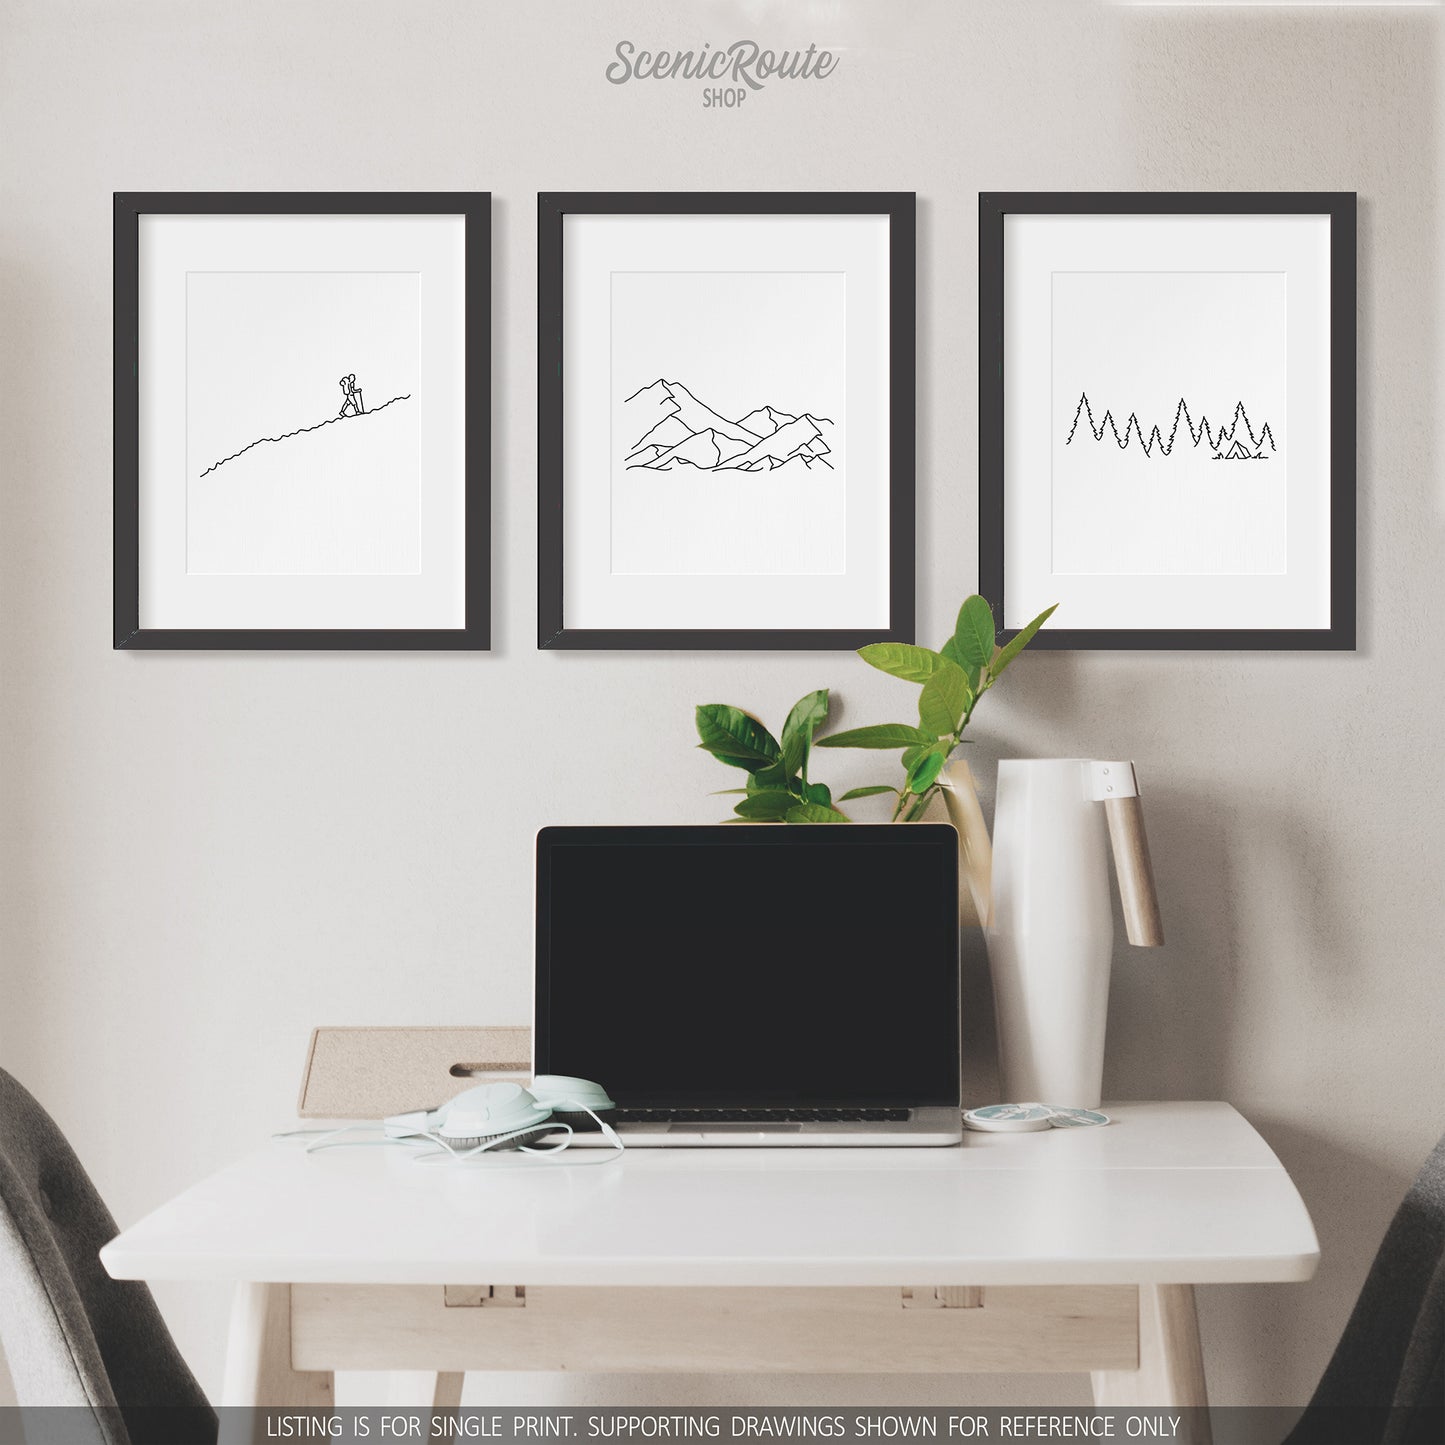 A group of three framed drawings on a wall above a desk with a laptop. The line art drawings include a person Hiking, a Mountain Range, and Camping